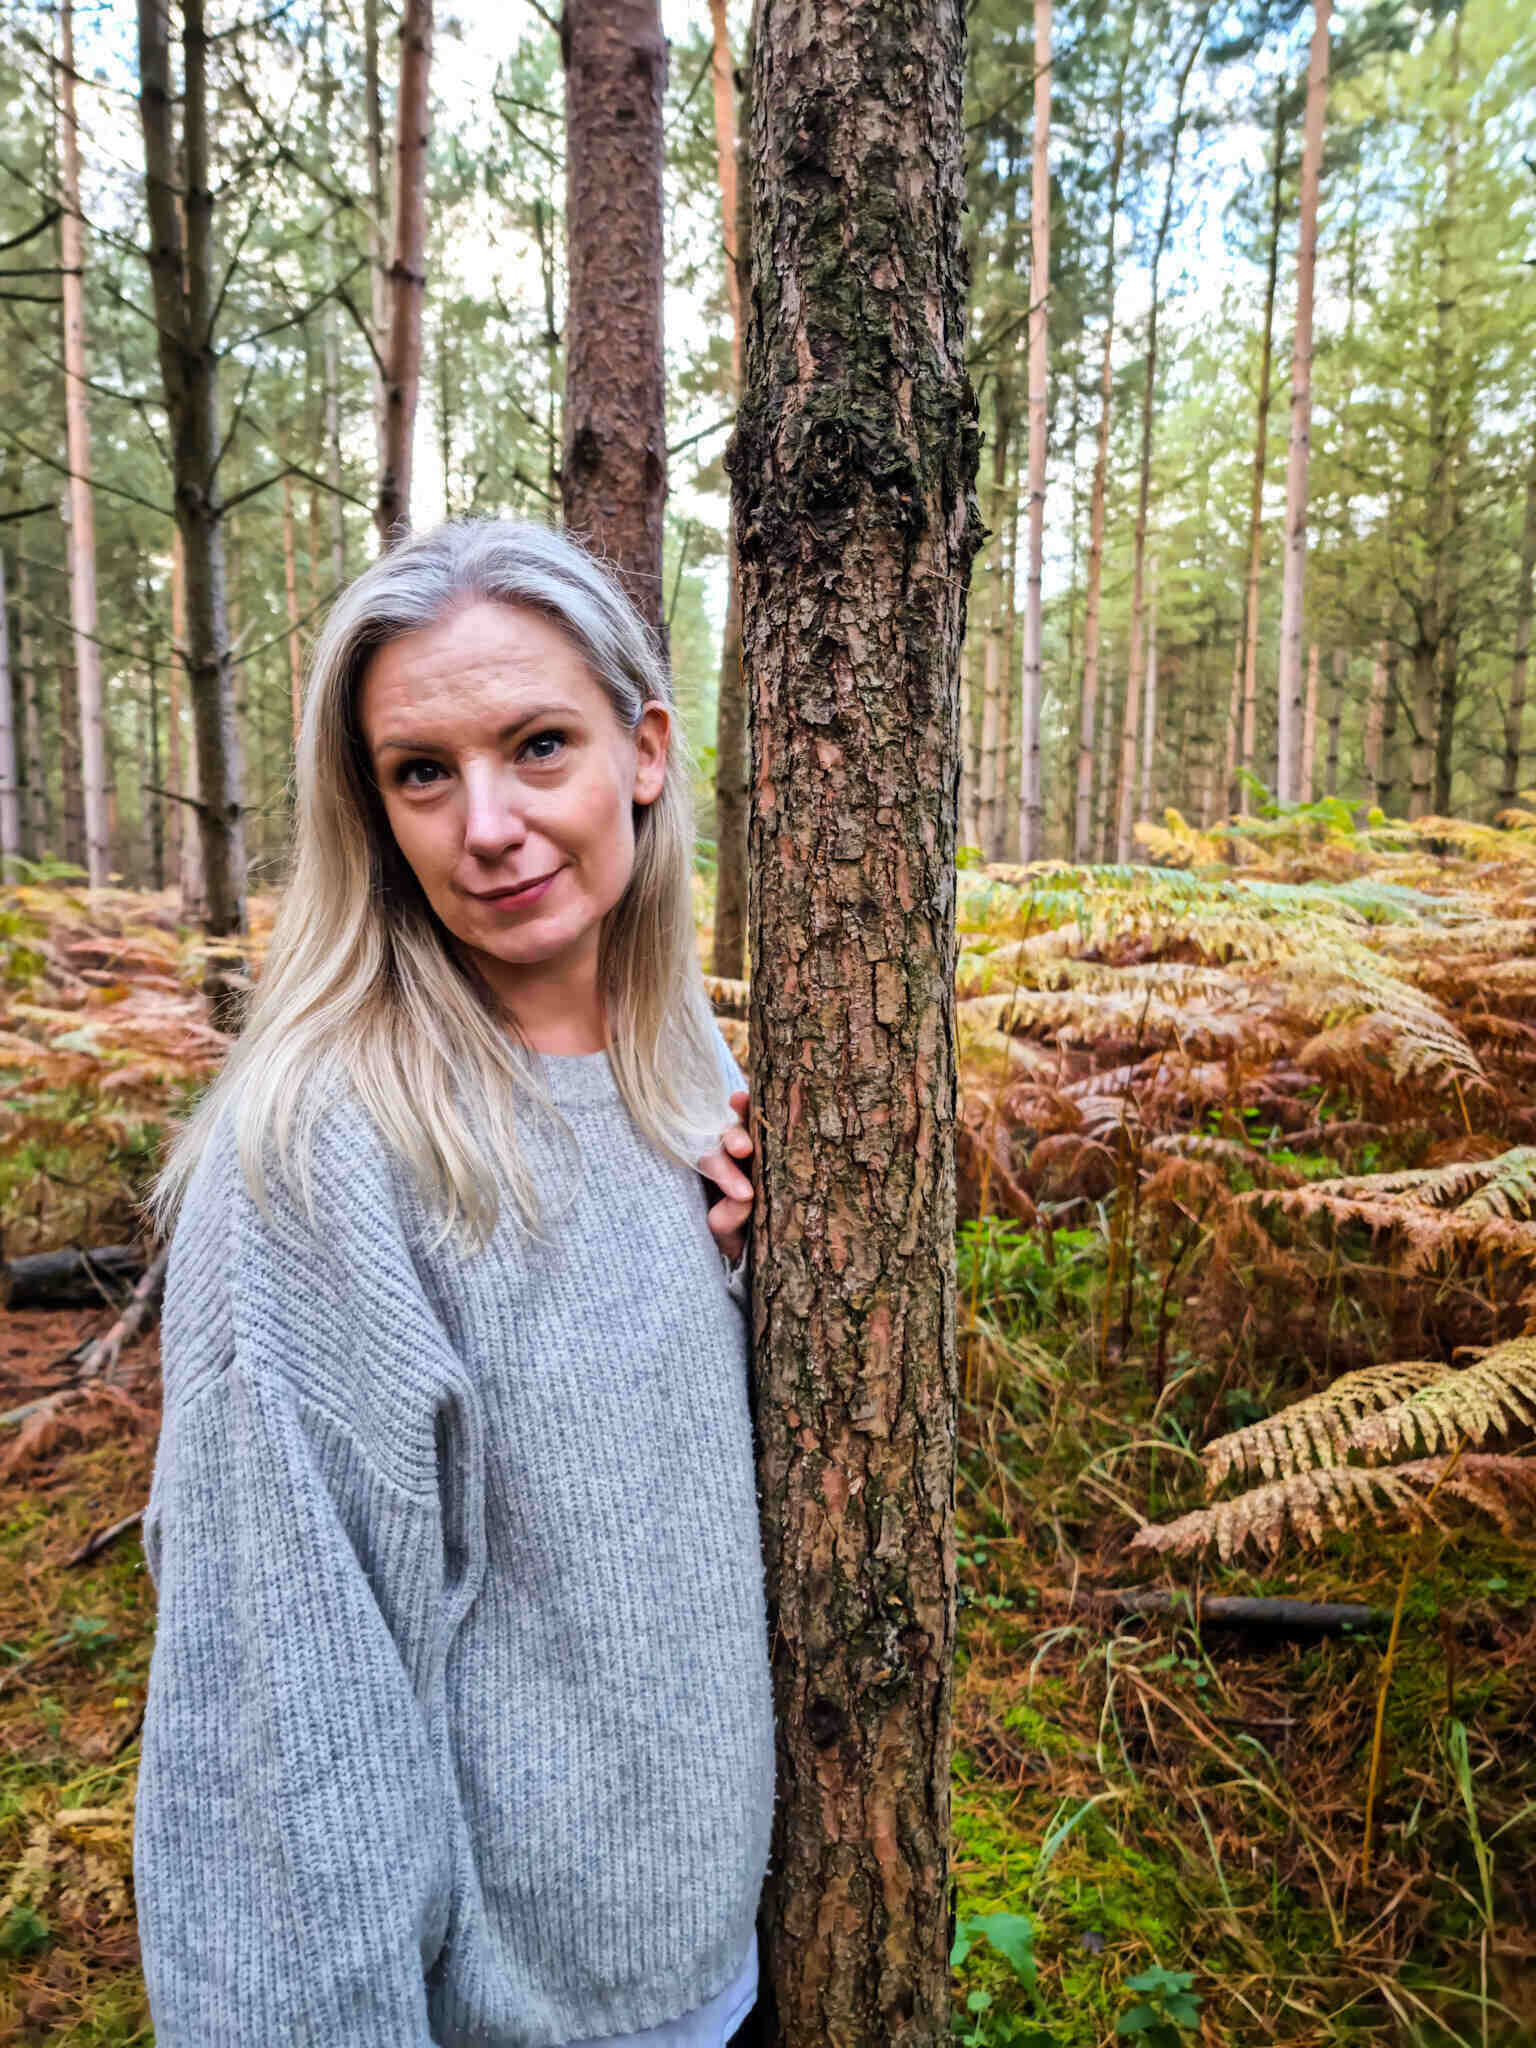 Sarah is standing in a forest next to a tree with golden ferns around her